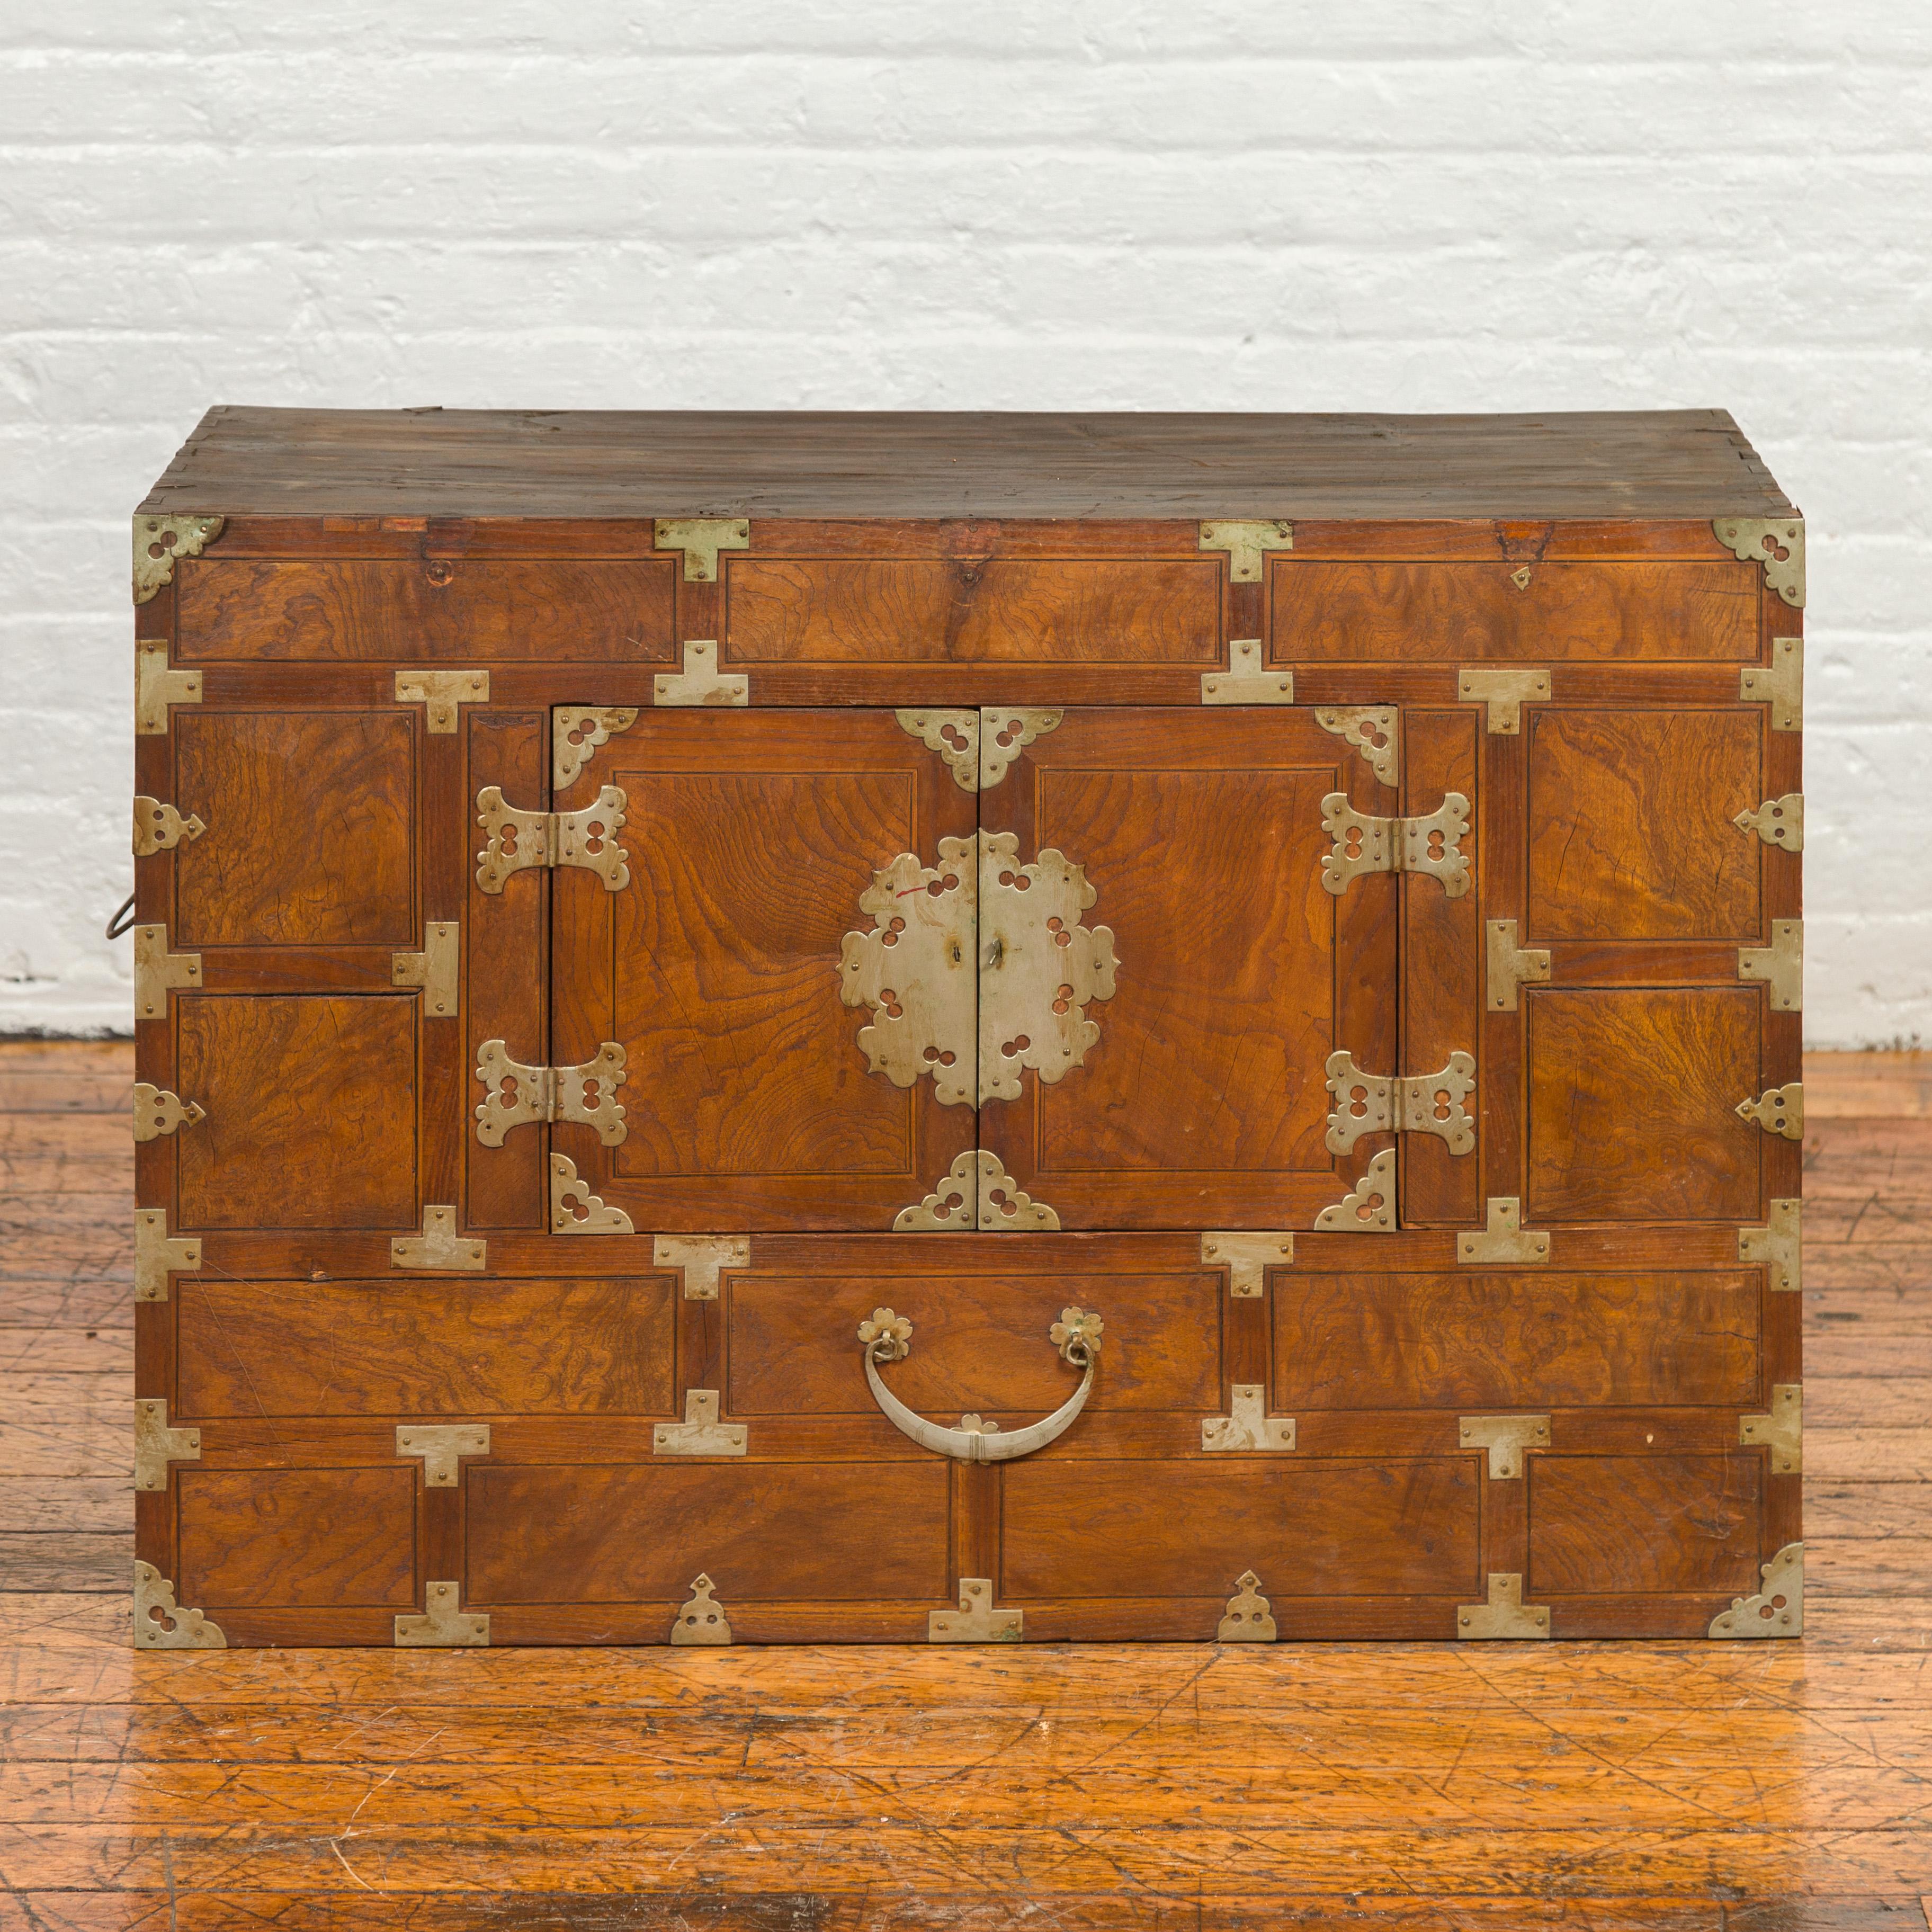 A Korean wooden side cabinet from the early 20th century, with double doors, abundant brass hardware and round medallion lock. Experience the allure of Eastern simplicity with this early 20th century Korean side cabinet, a delightful fusion of